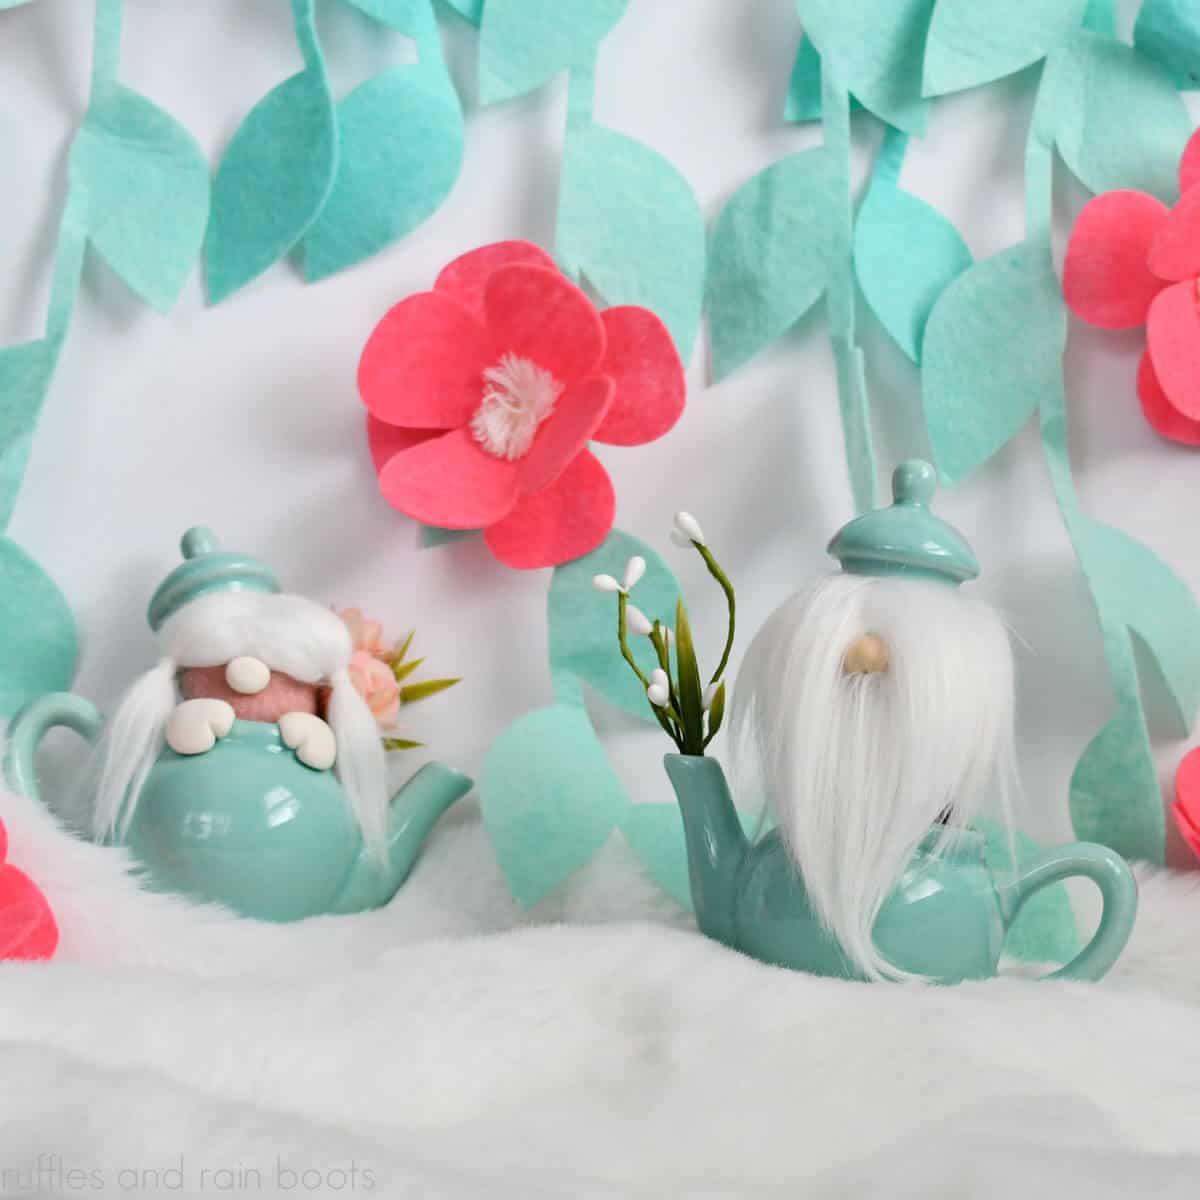 Square close up image of a boy and girl gnome in teal teapots on fur in front of a white wall with felt hanging vines and pink flowers.